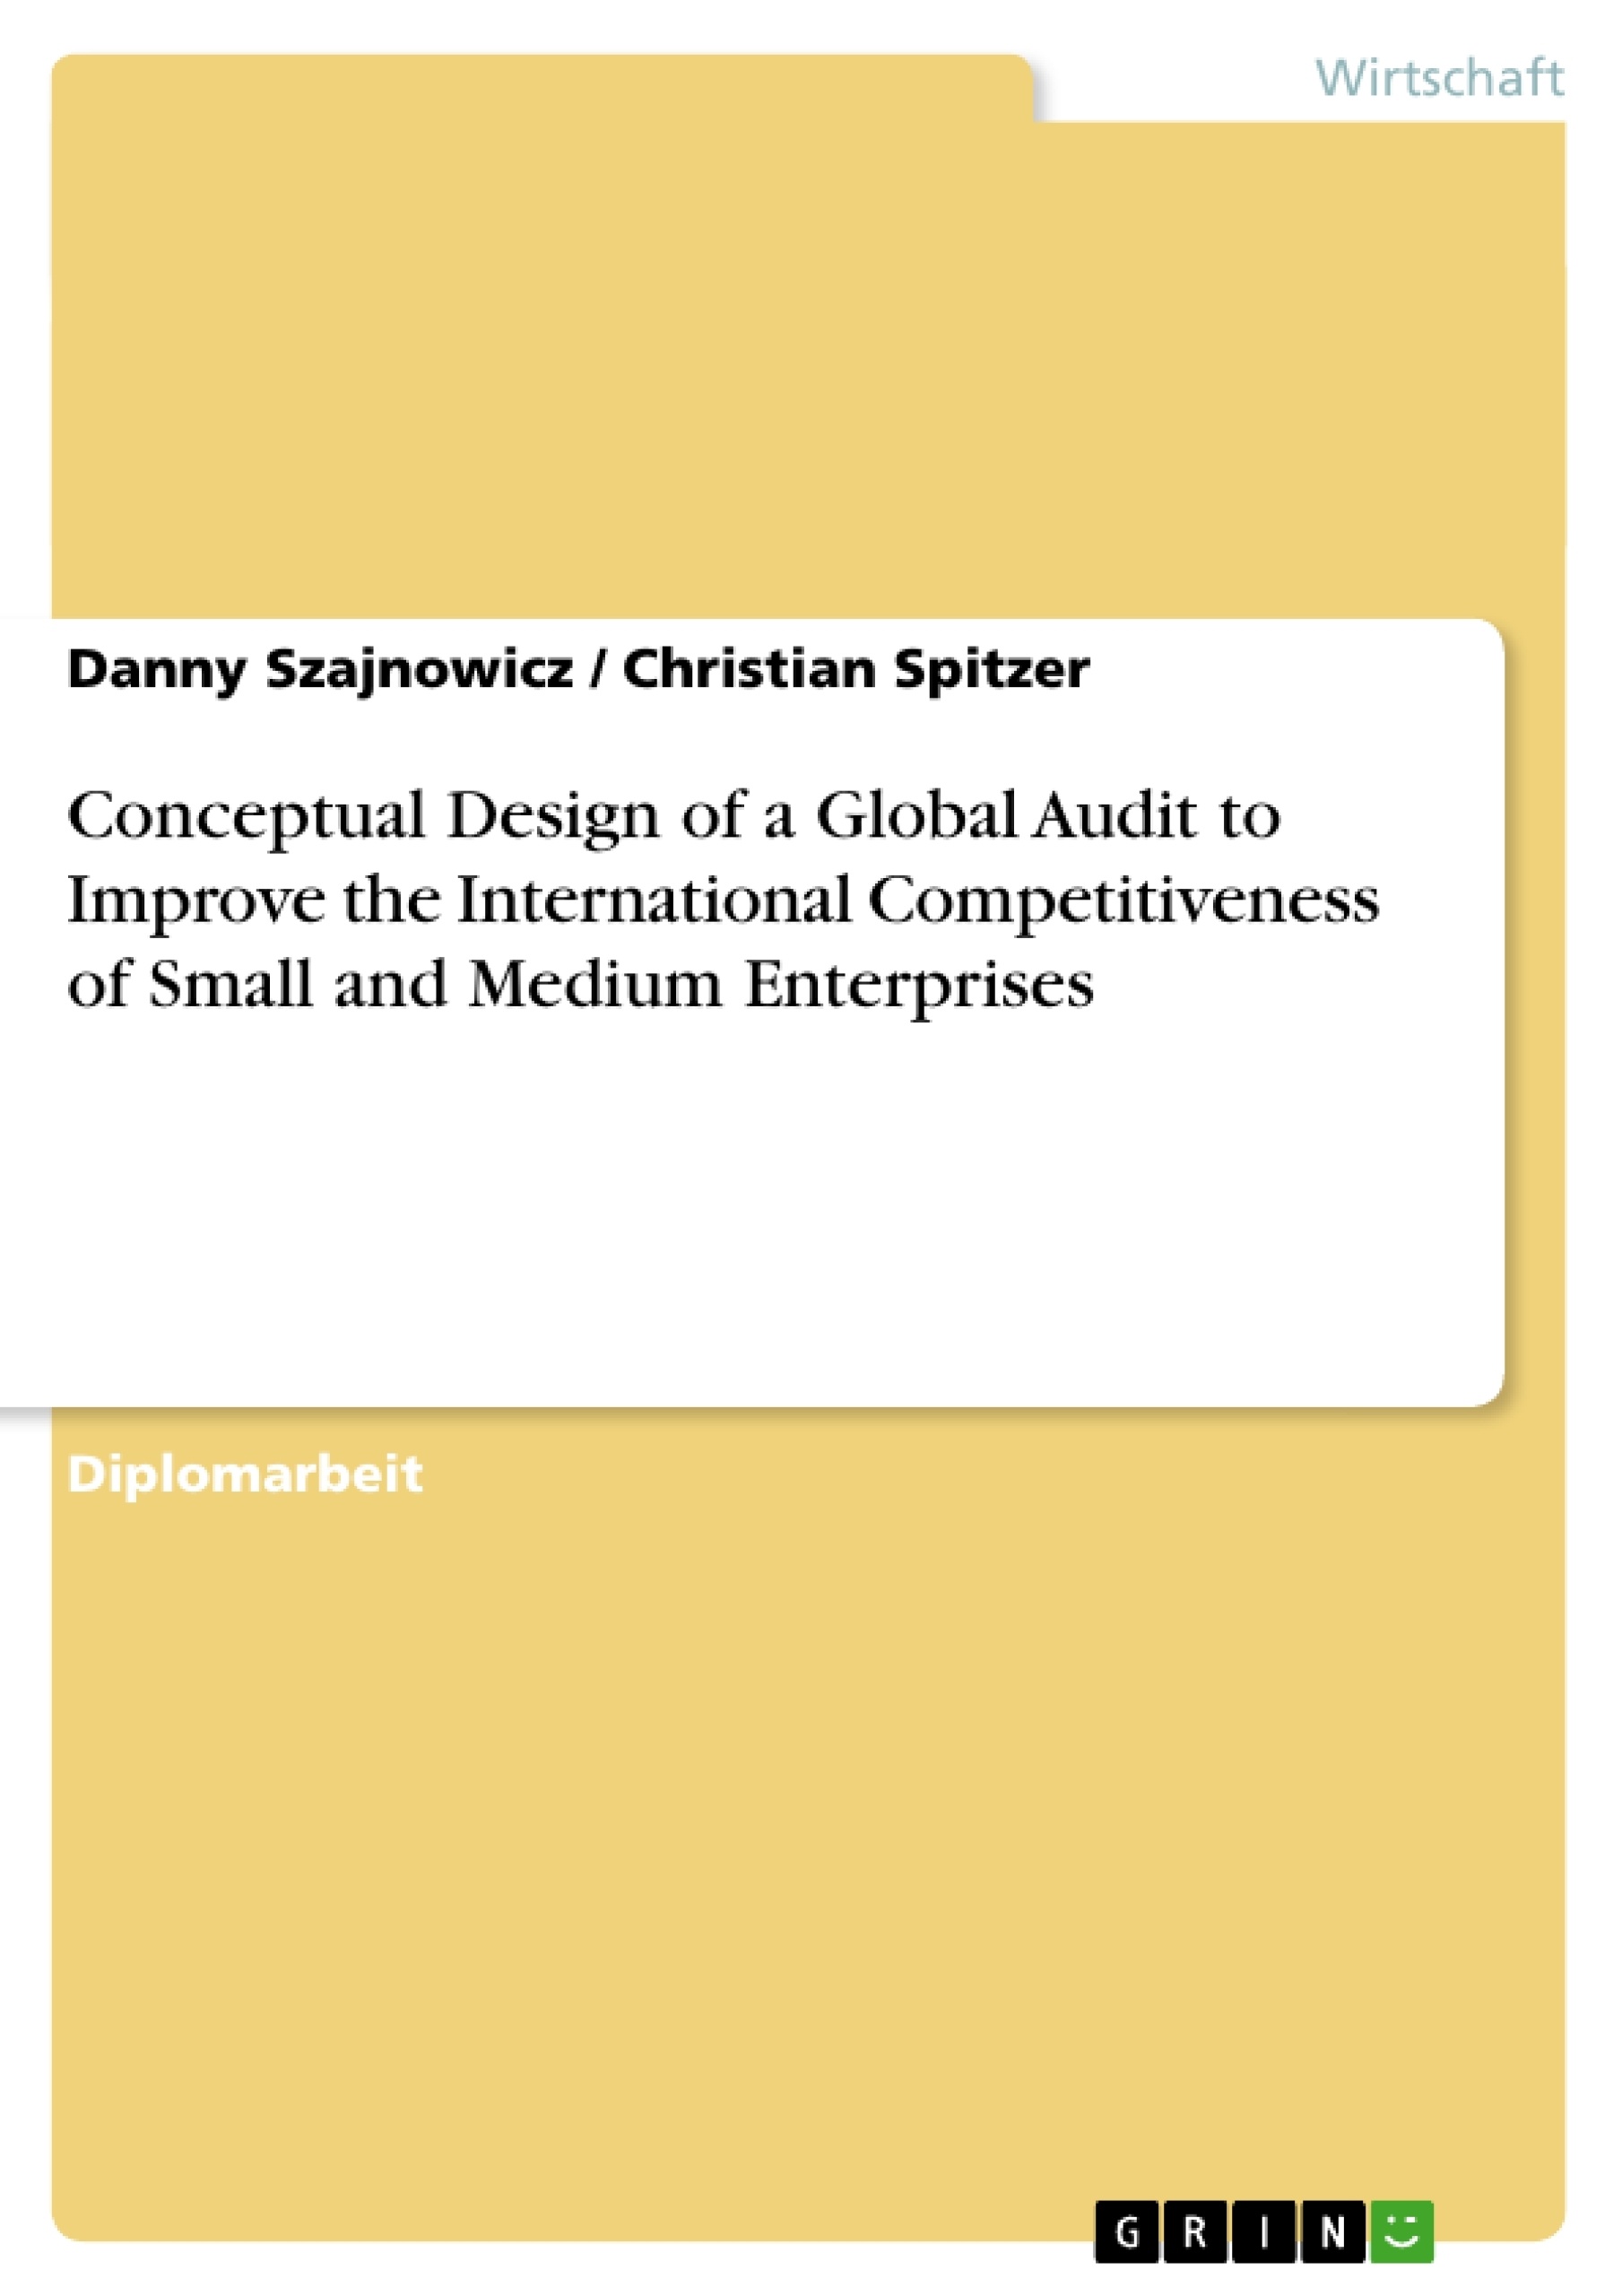 Titel: Conceptual Design of a Global Audit to Improve the International Competitiveness of Small and Medium Enterprises